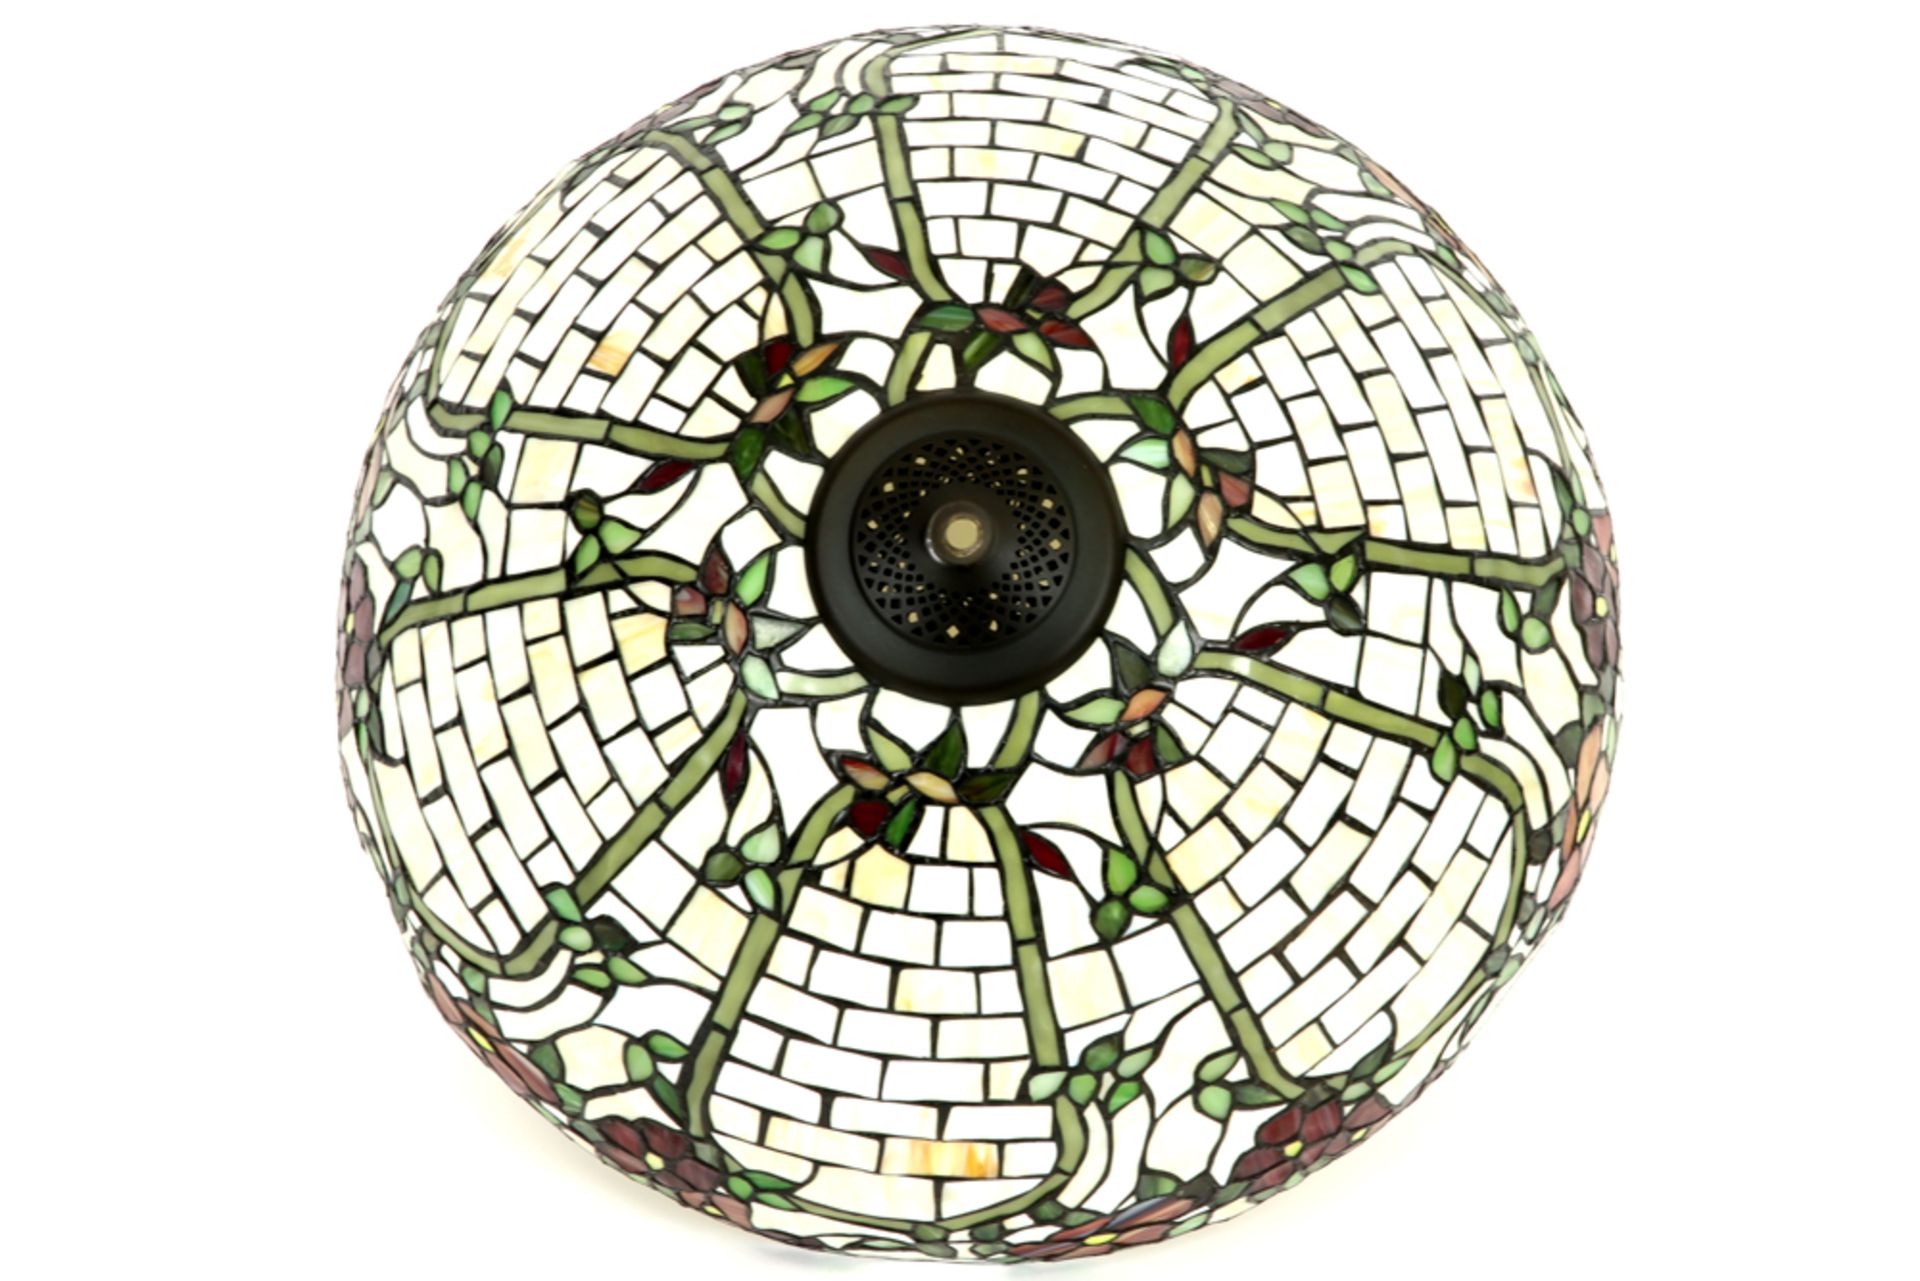 Tiffany style lamp with base in bronze and shade in glass-in-lead||Lamp in Tiffany-stijl met bronzen - Bild 3 aus 3